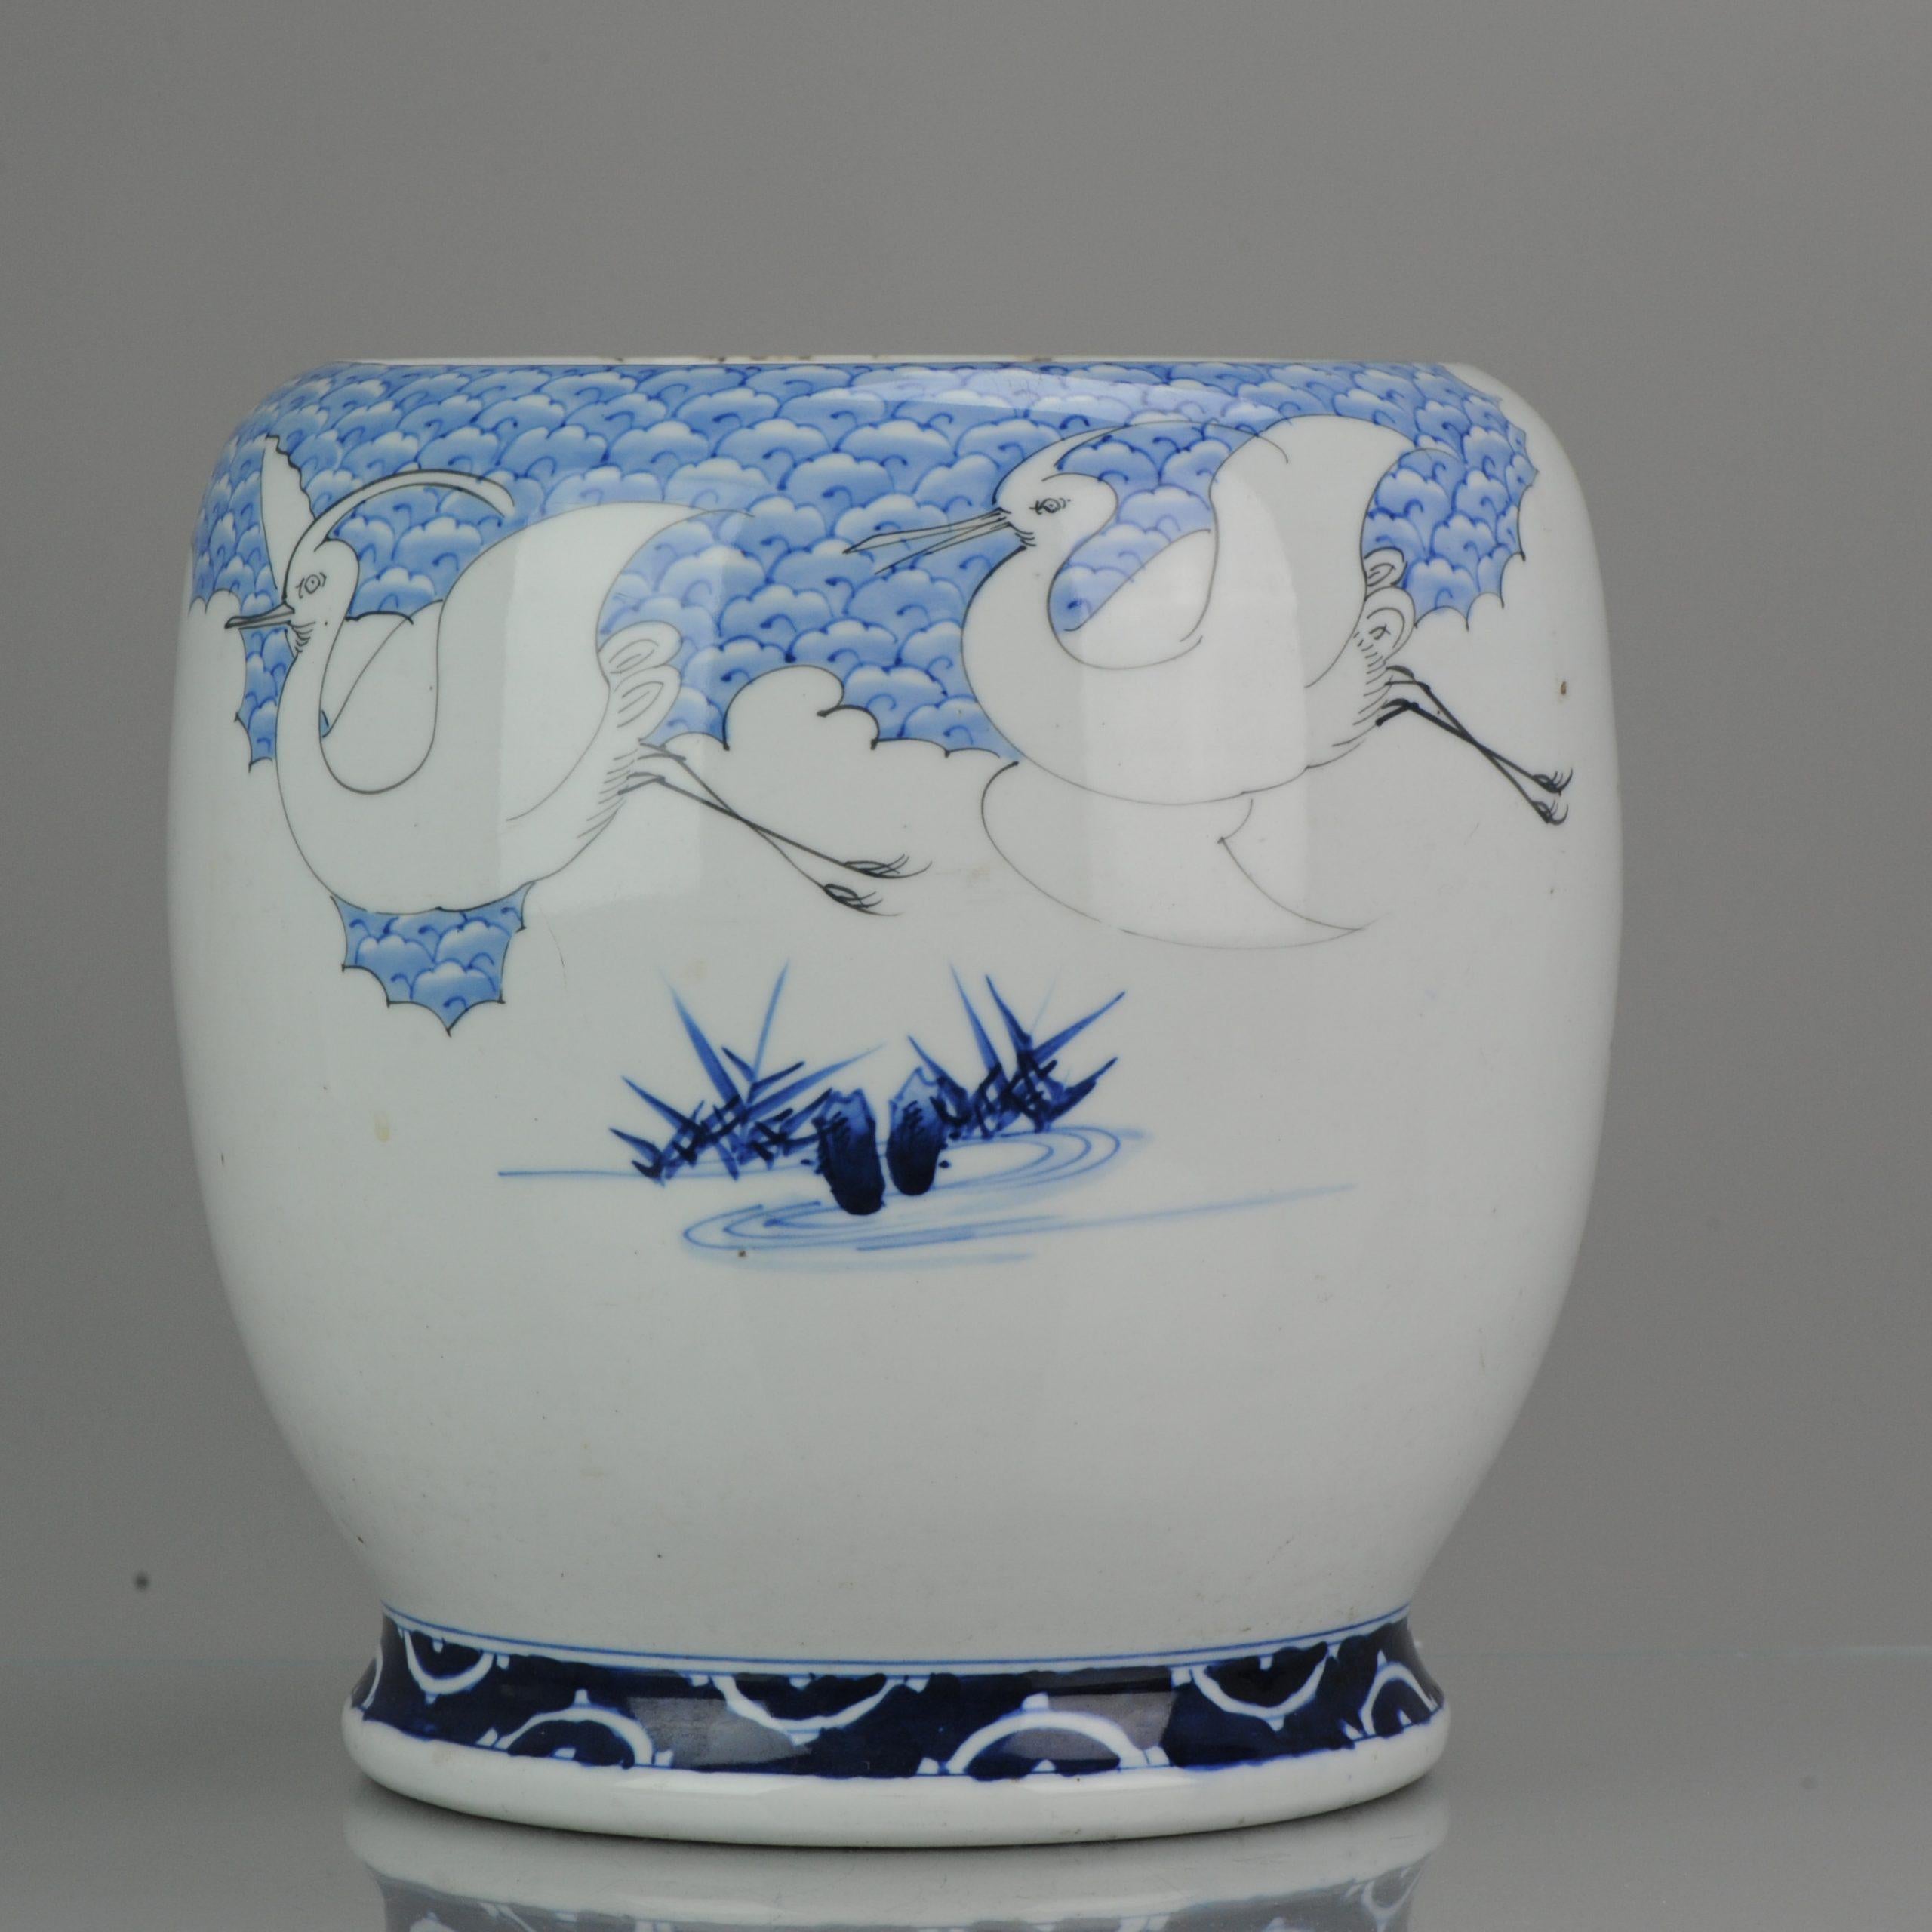 Large, lovely and very nicely handcrafted piece of large porcelain.
Rare. Similar pieces are pictured in 